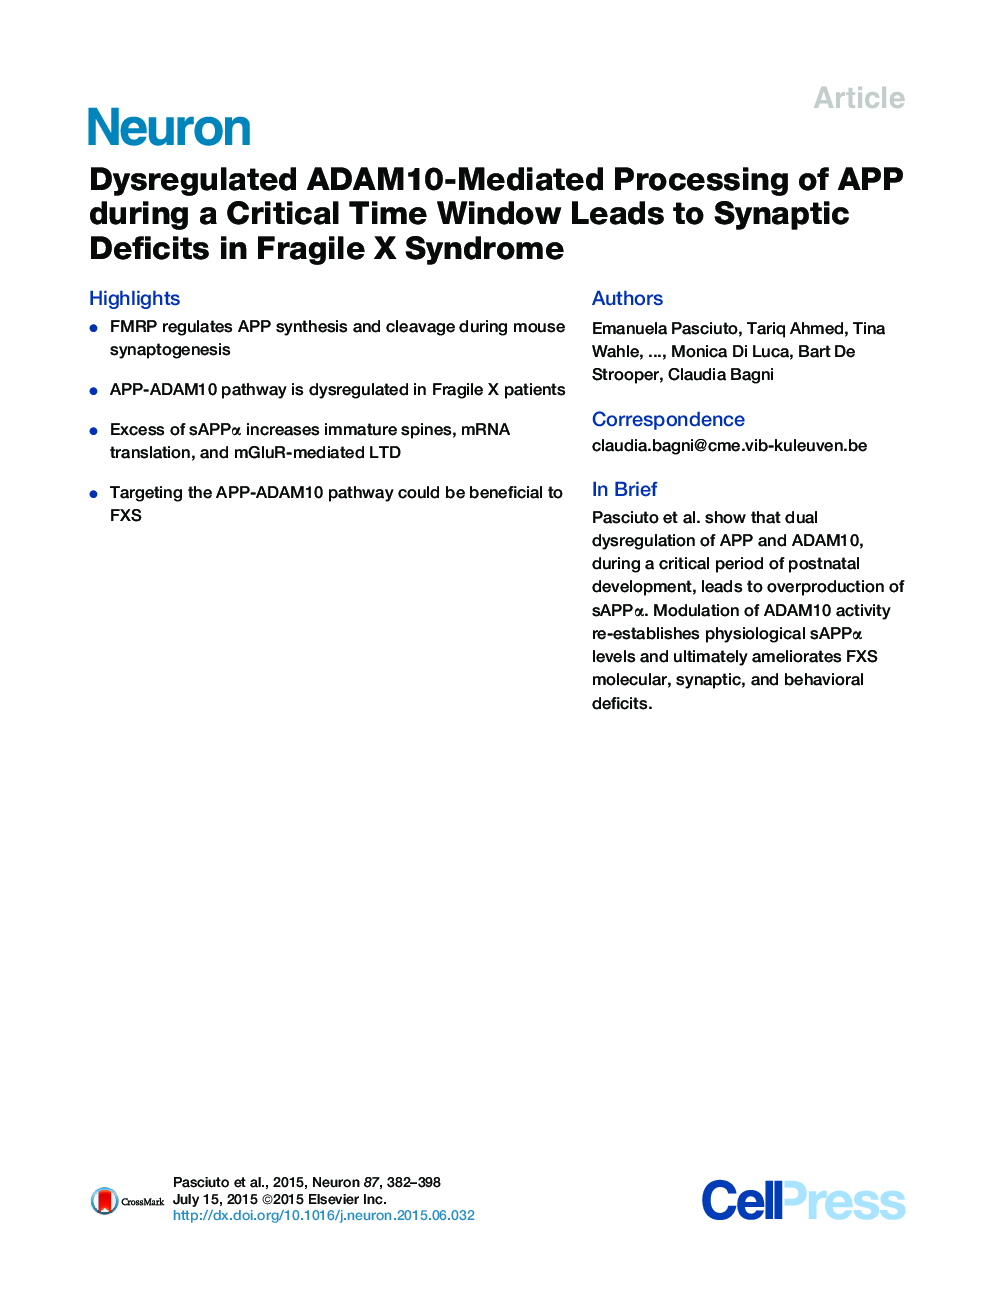 Dysregulated ADAM10-Mediated Processing of APP during a Critical Time Window Leads to Synaptic Deficits in Fragile X Syndrome